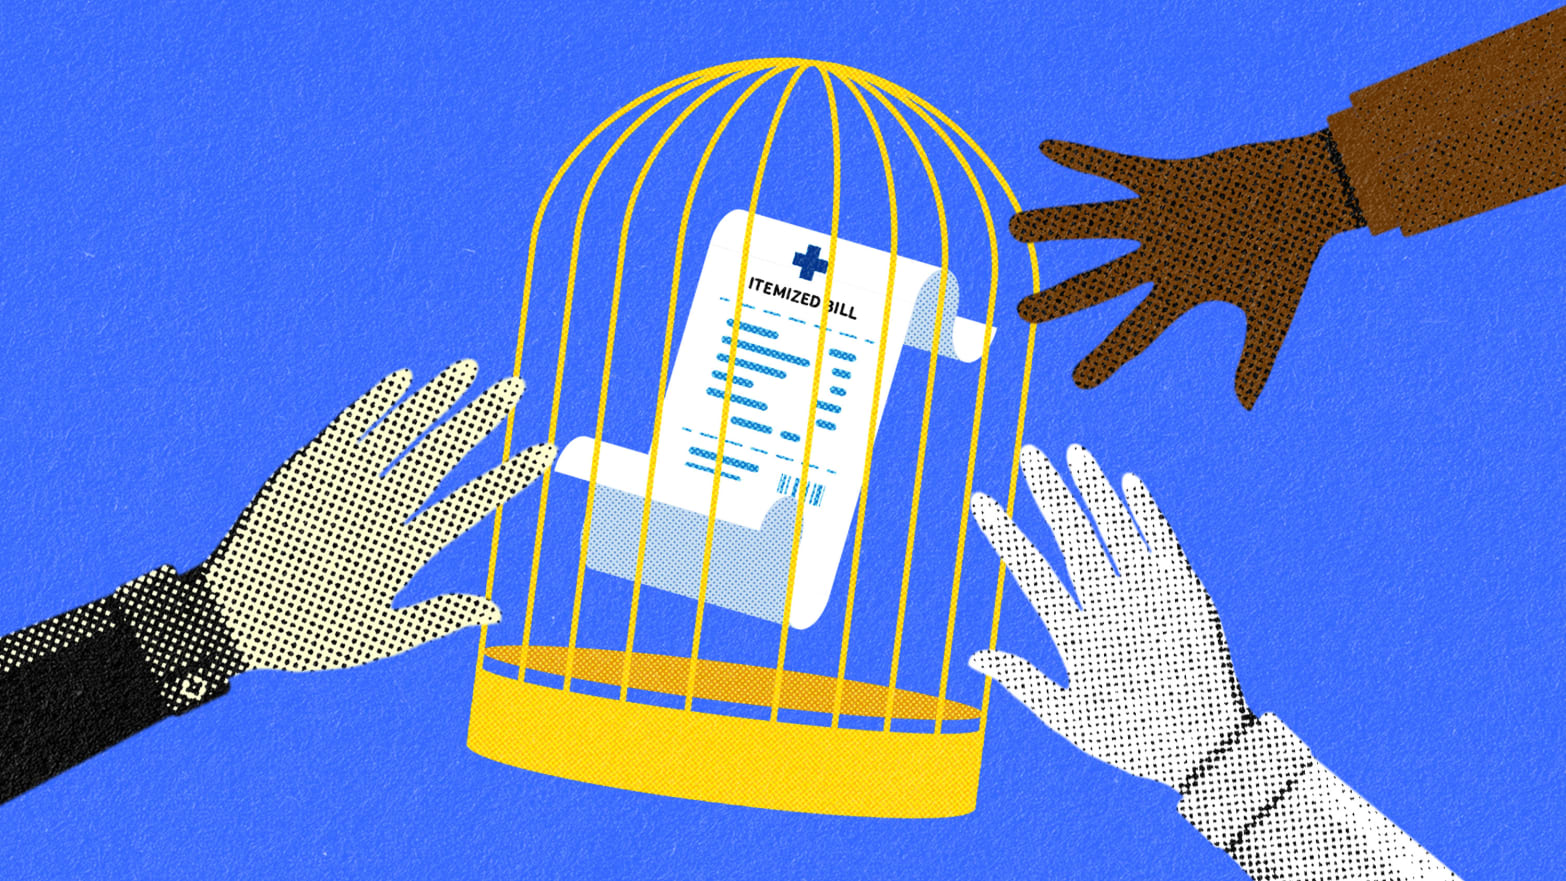 An illustration of an itemized bill inside a cage with hands reaching out for it